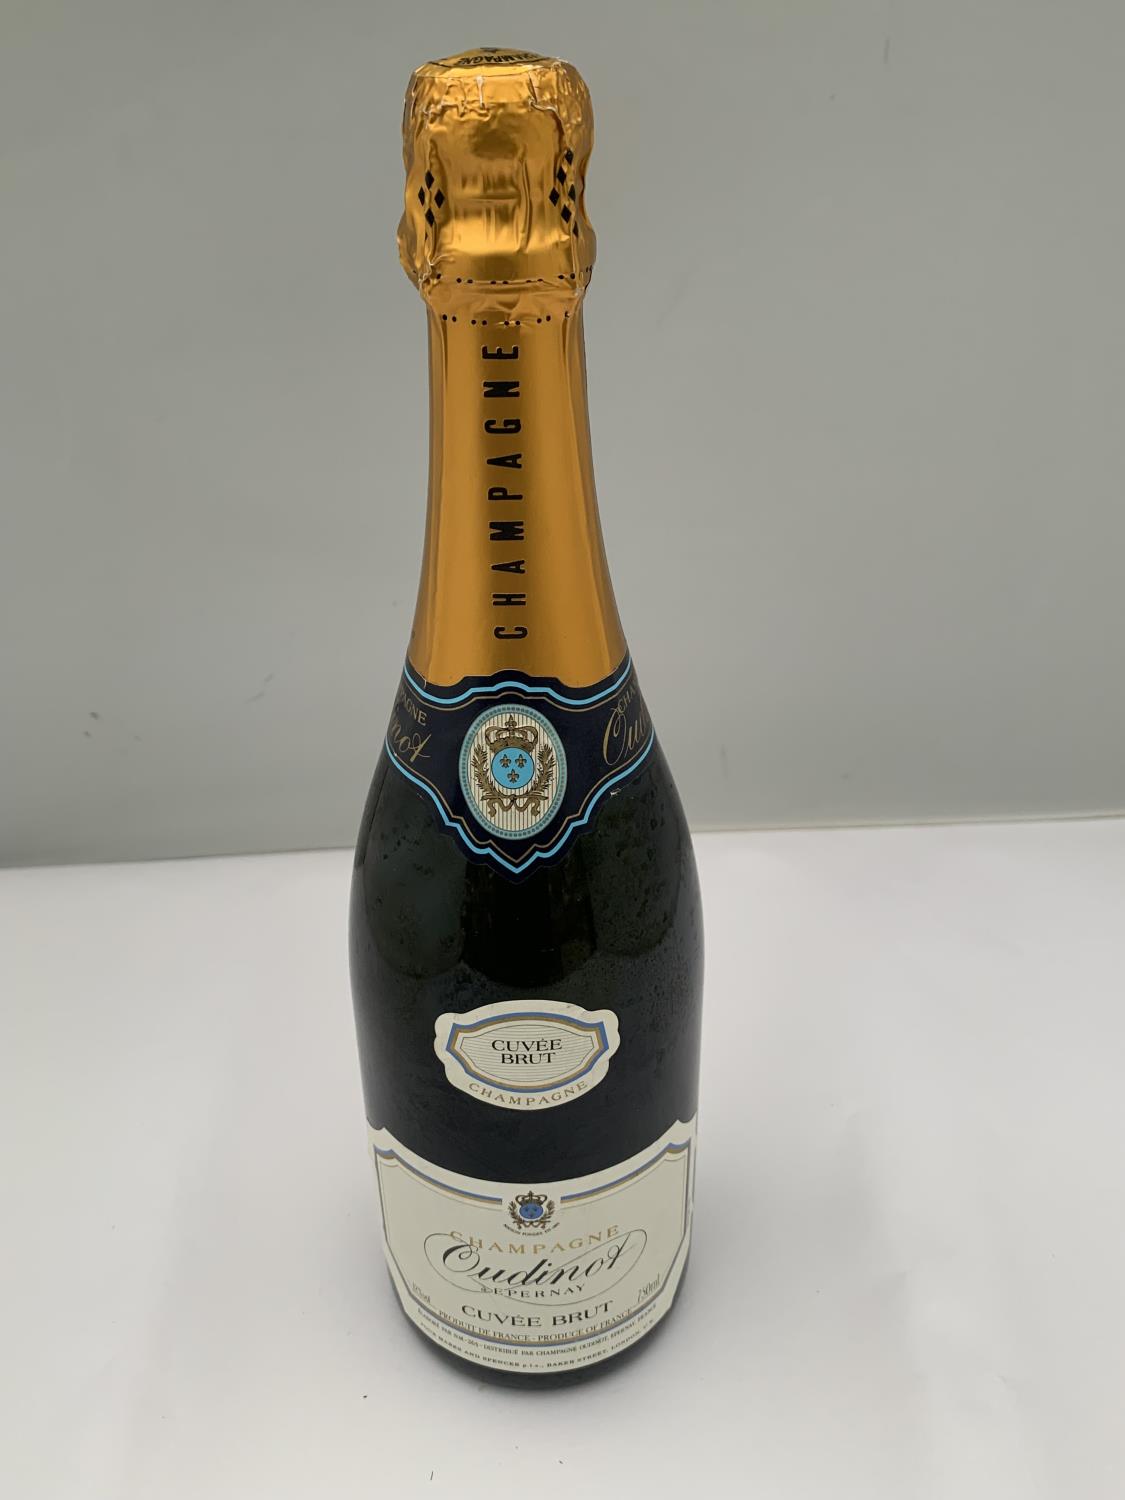 A BOTTLE OF OUDINOT EPERNAY CUVEE BRUT CHAMPAGNE